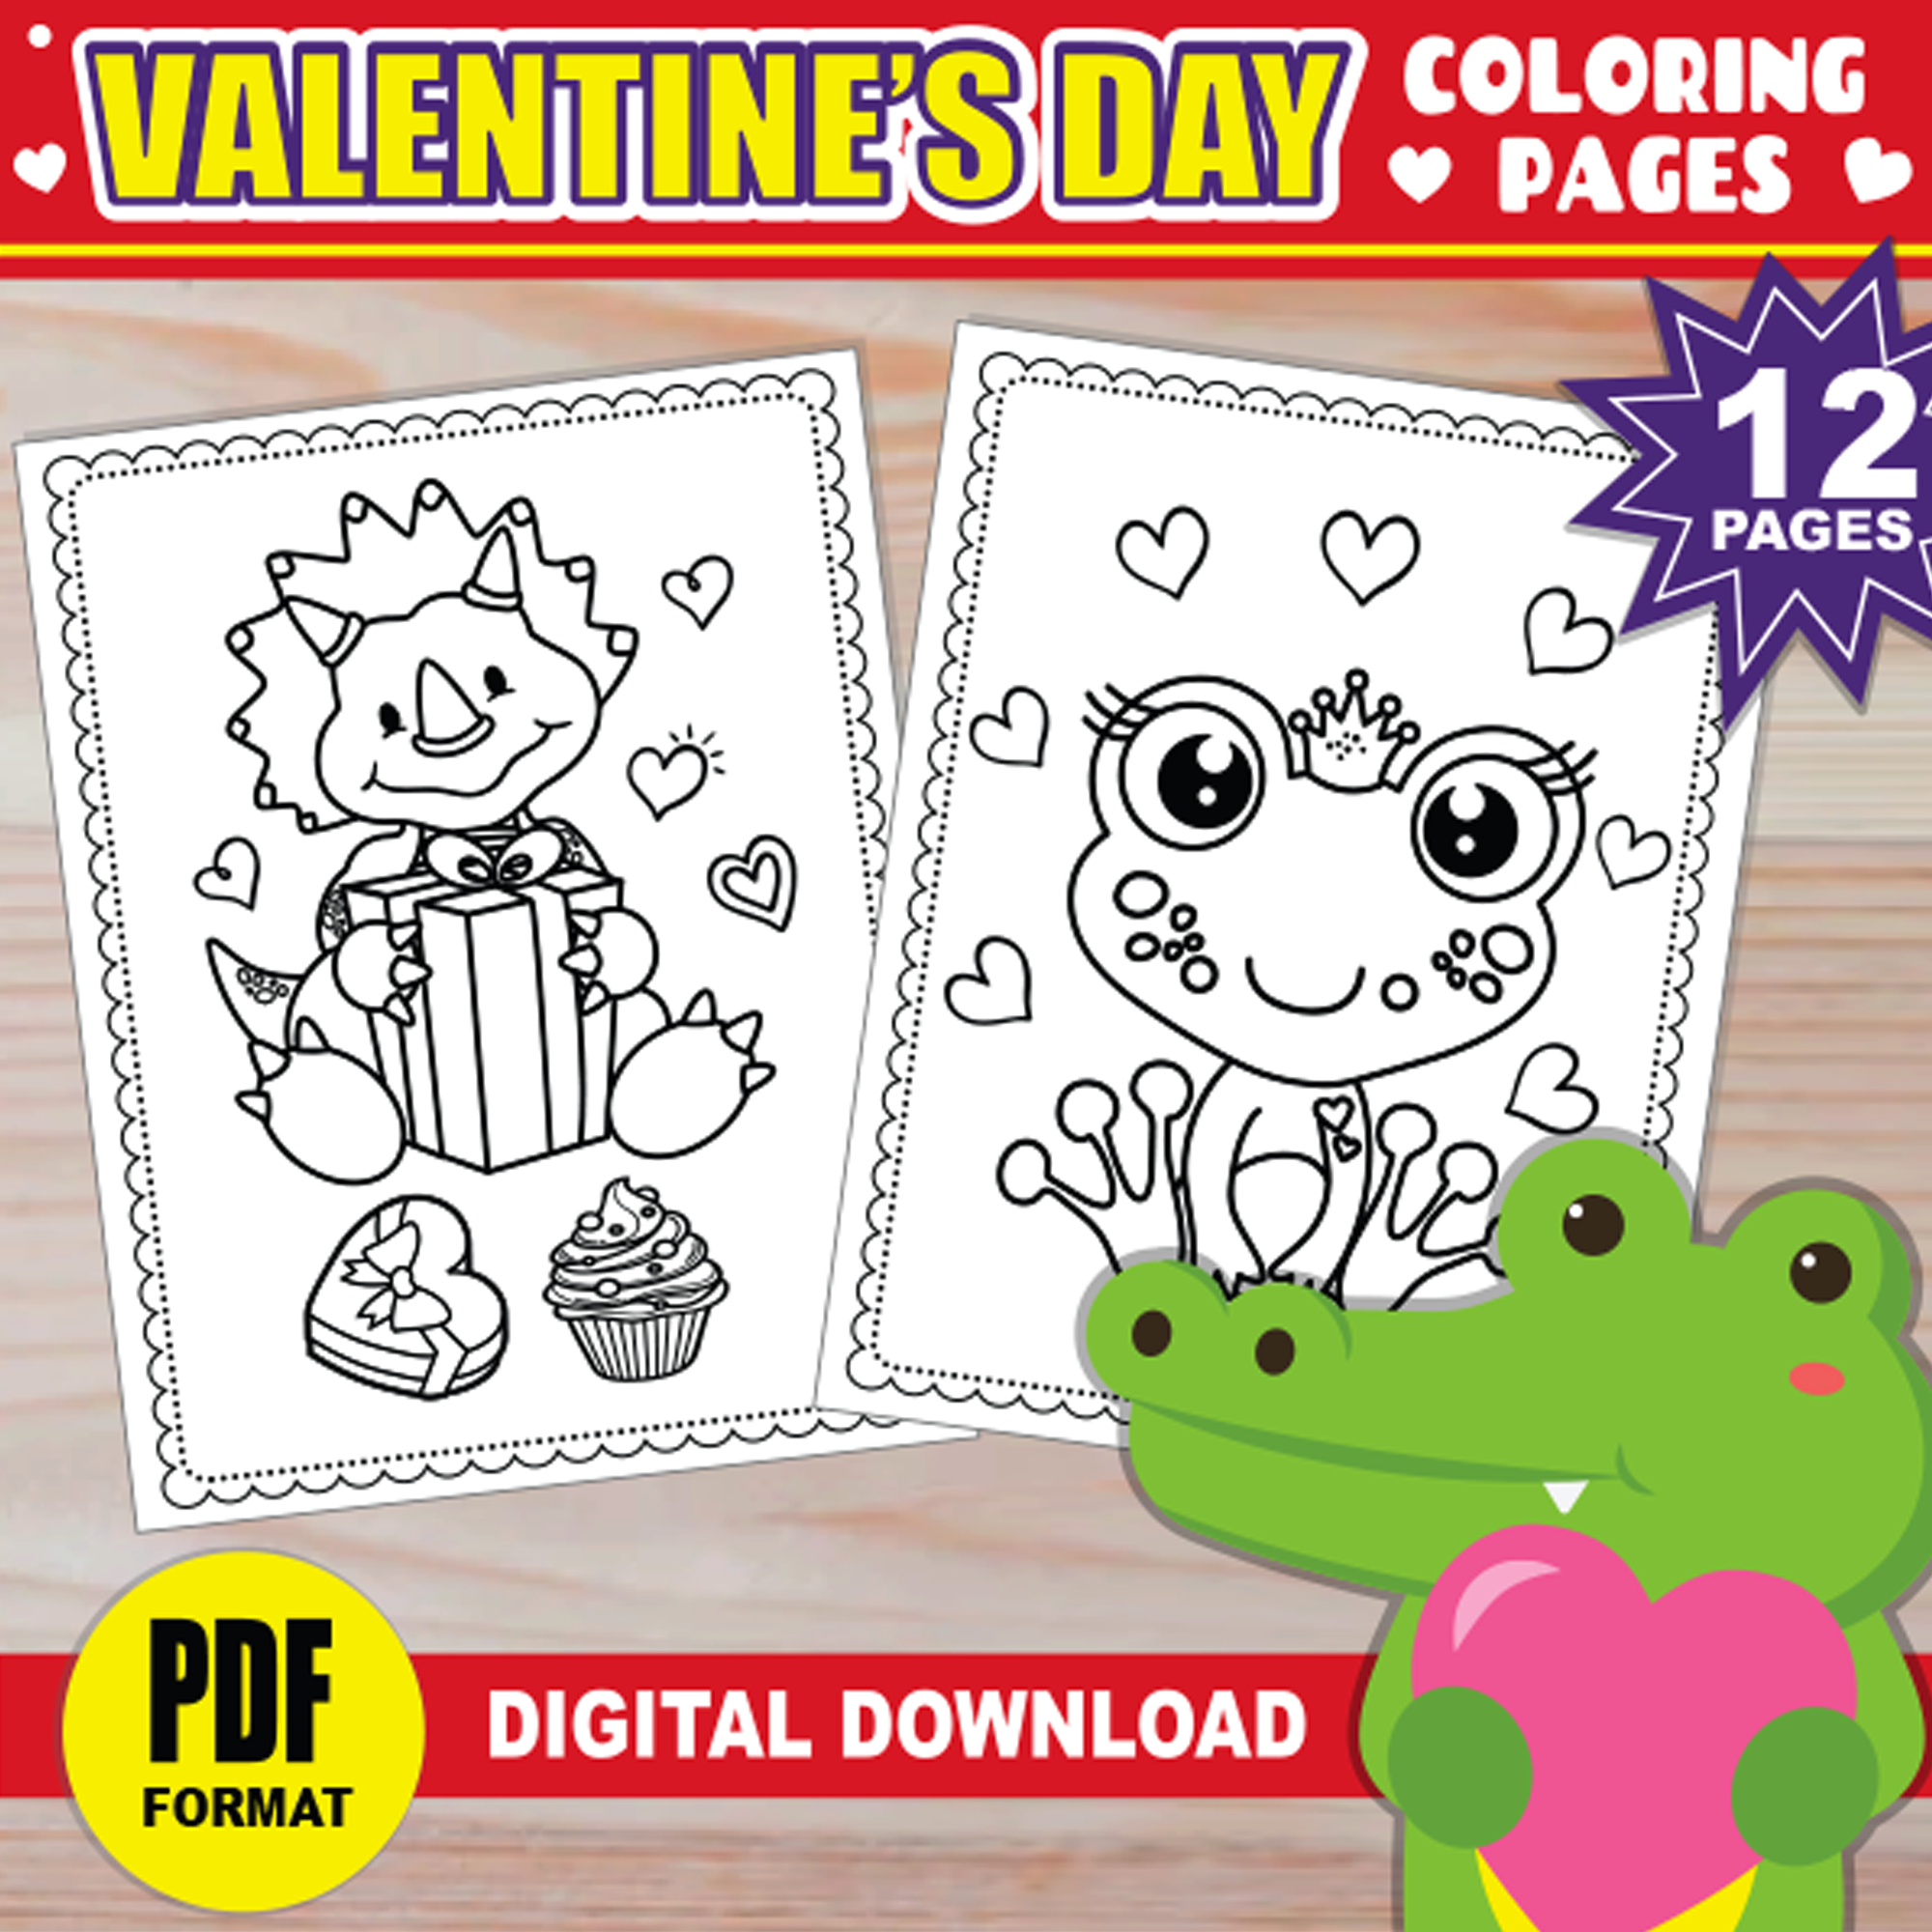 Valentines day coloring pages for kids printable valentines day activity valentines party favors easy to color